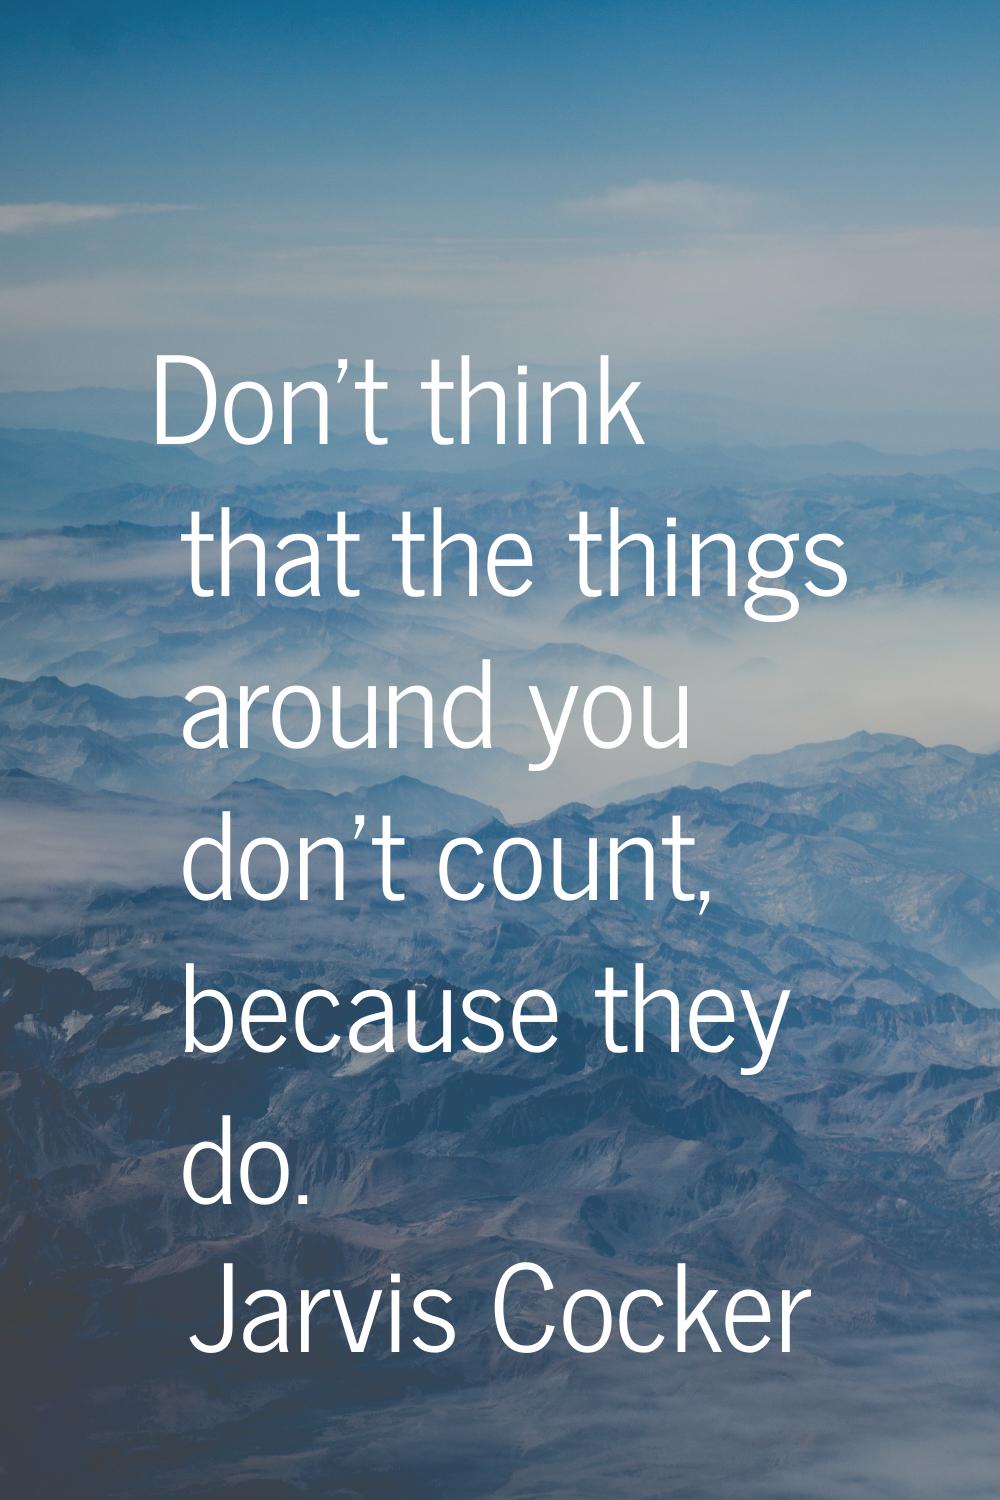 Don't think that the things around you don't count, because they do.